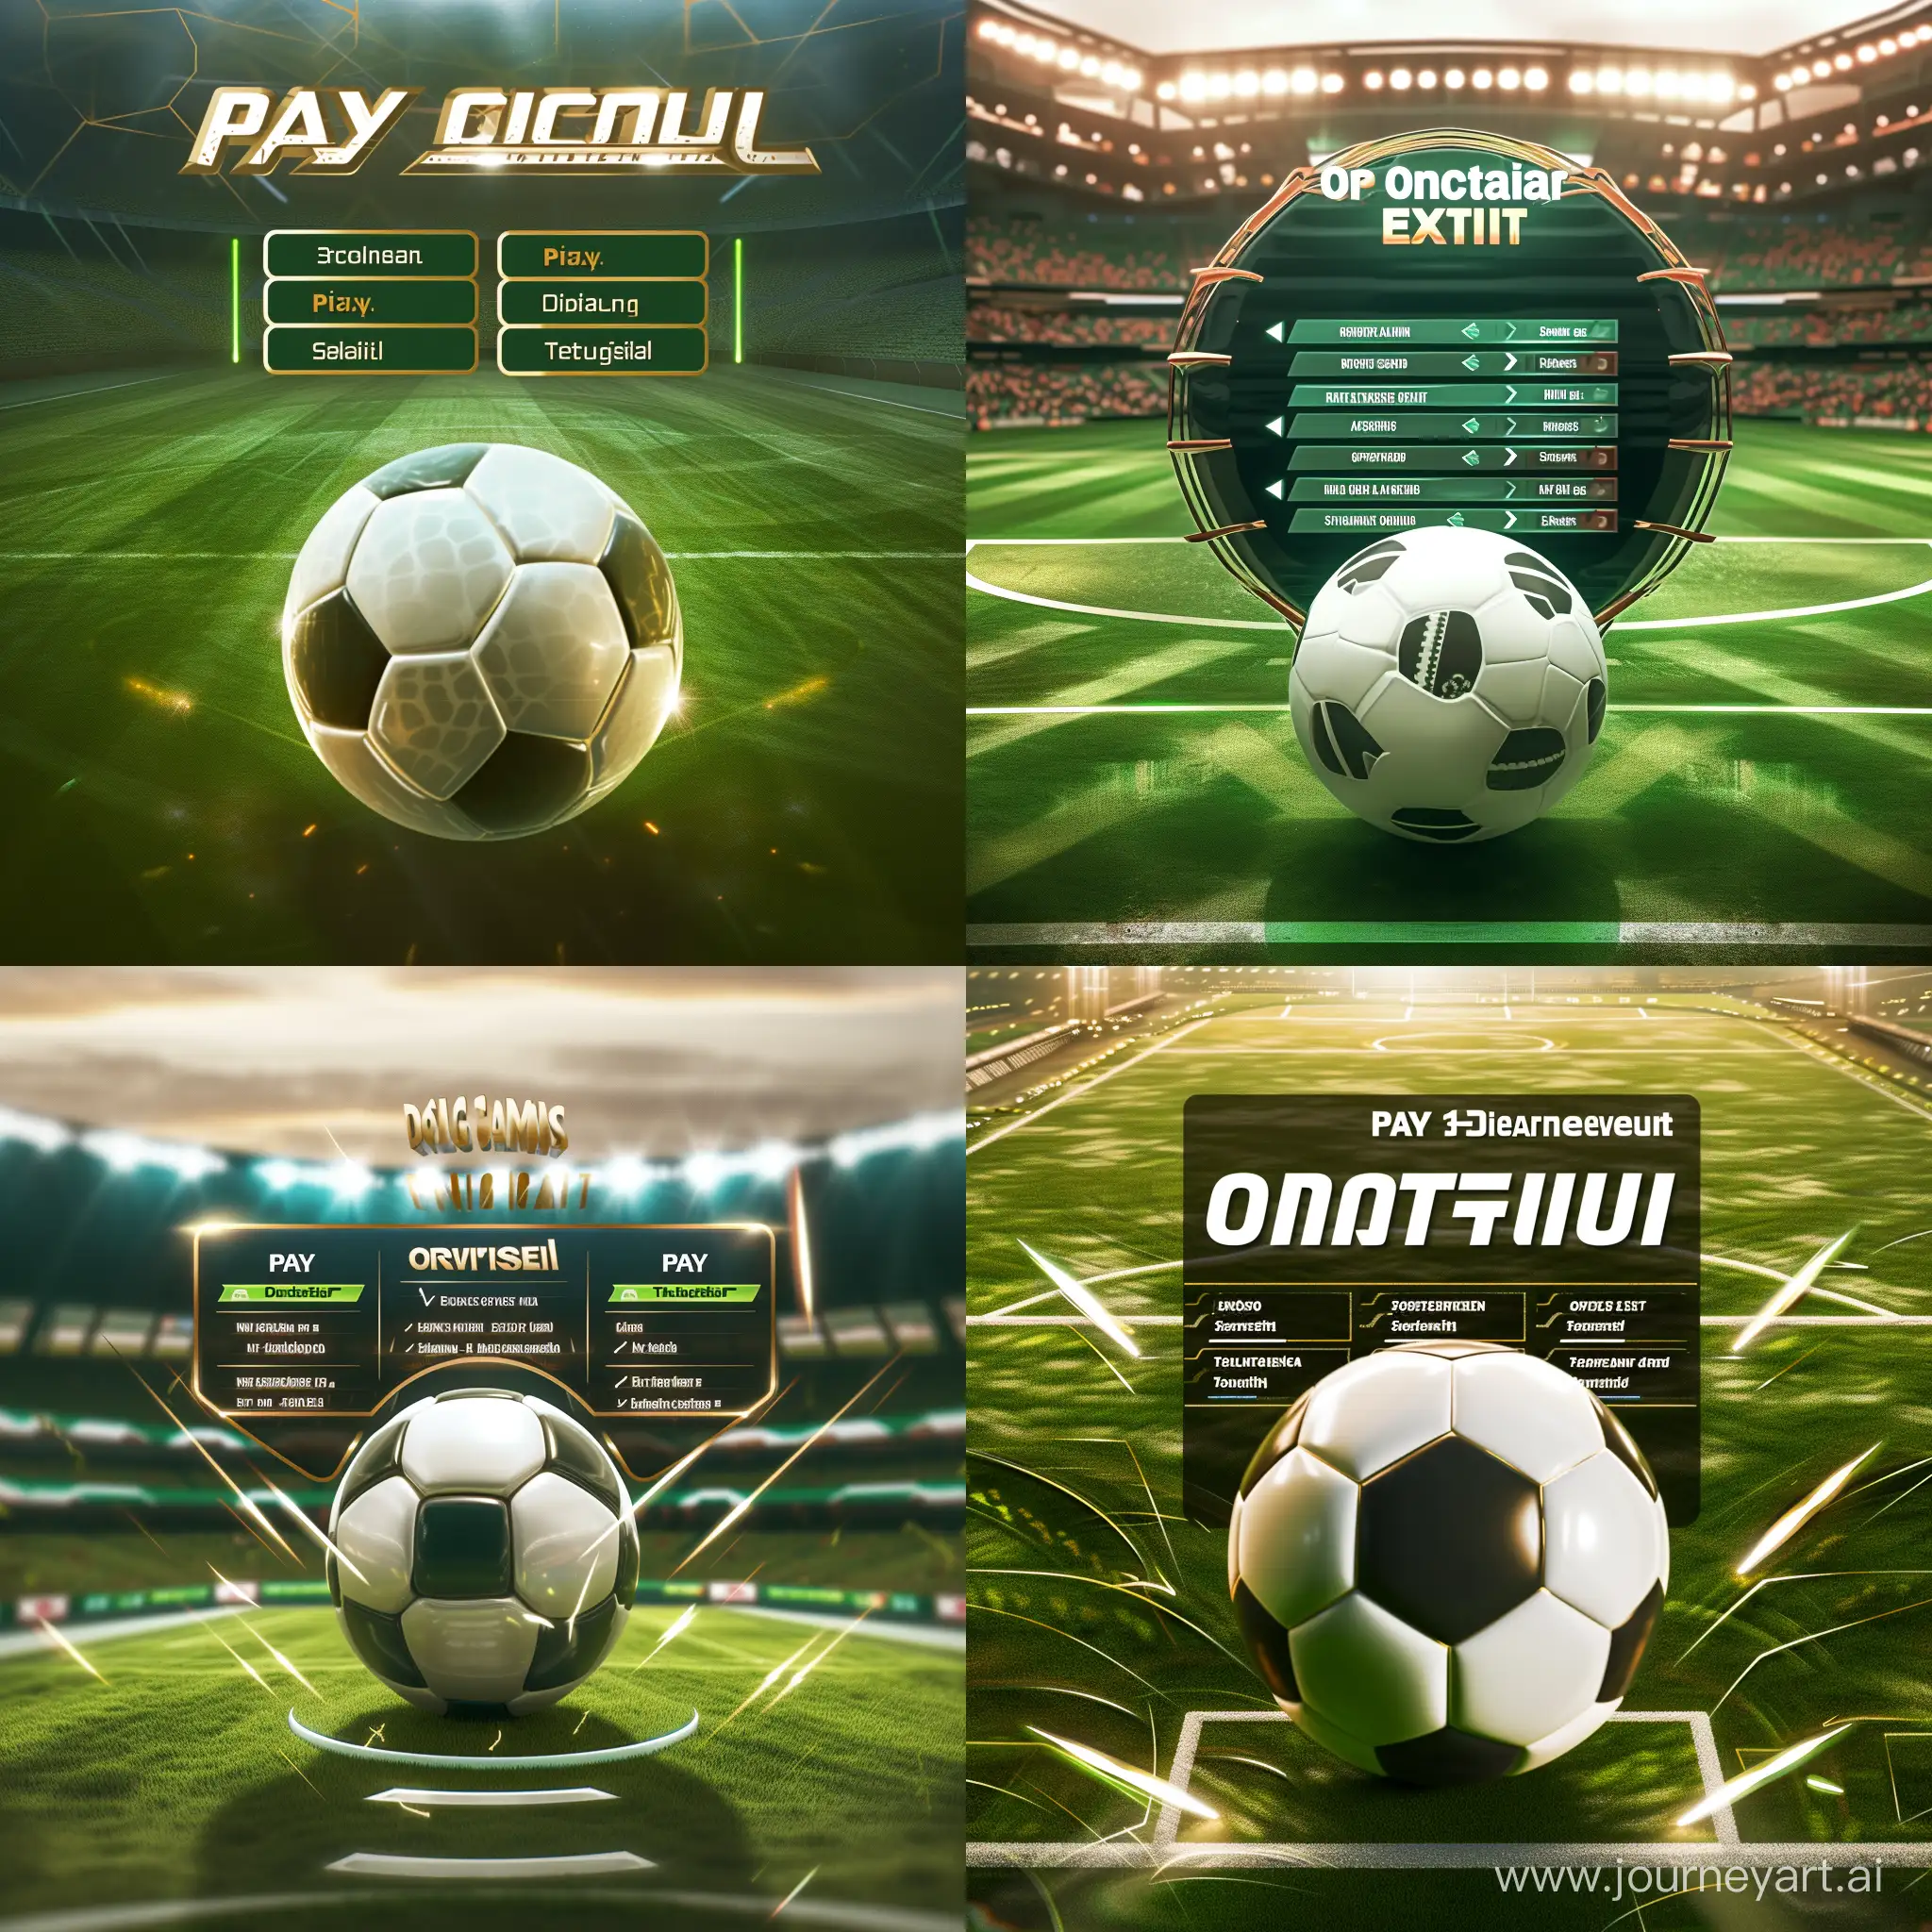 Immersive-Soccer-Simulator-Game-Menu-with-3D-Ball-and-HighTech-Design